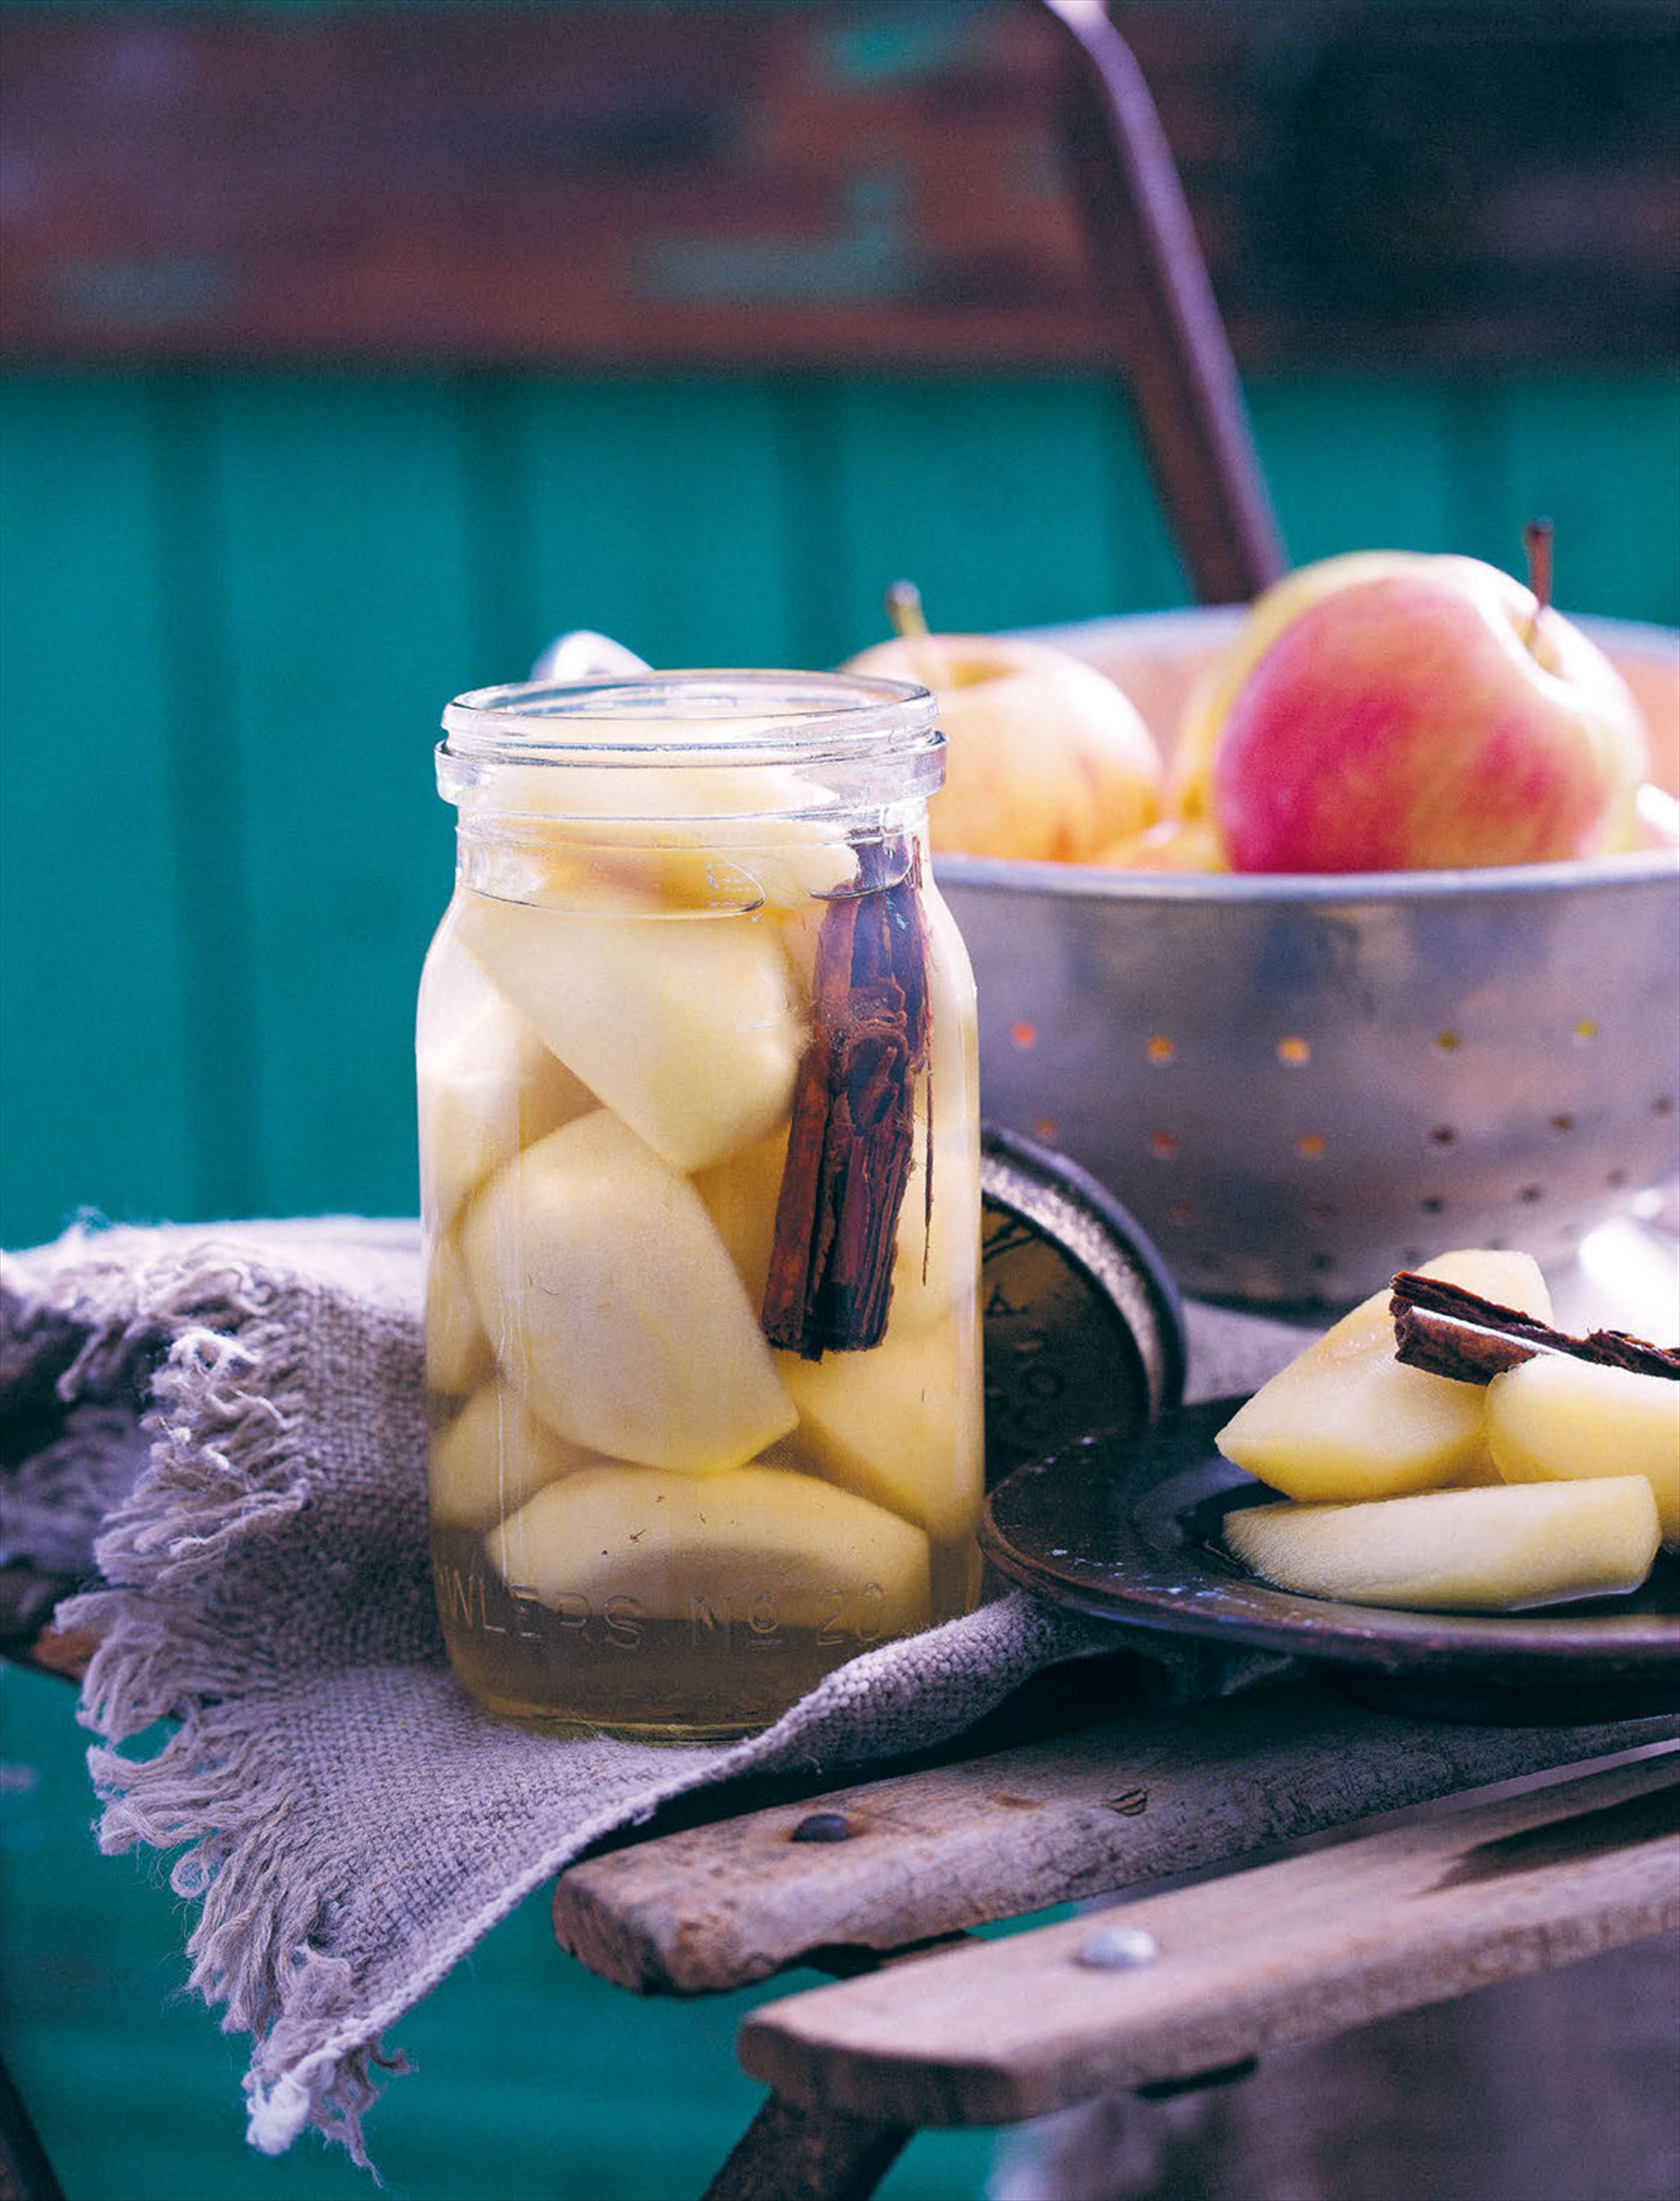 Preserved apples with cinnamon